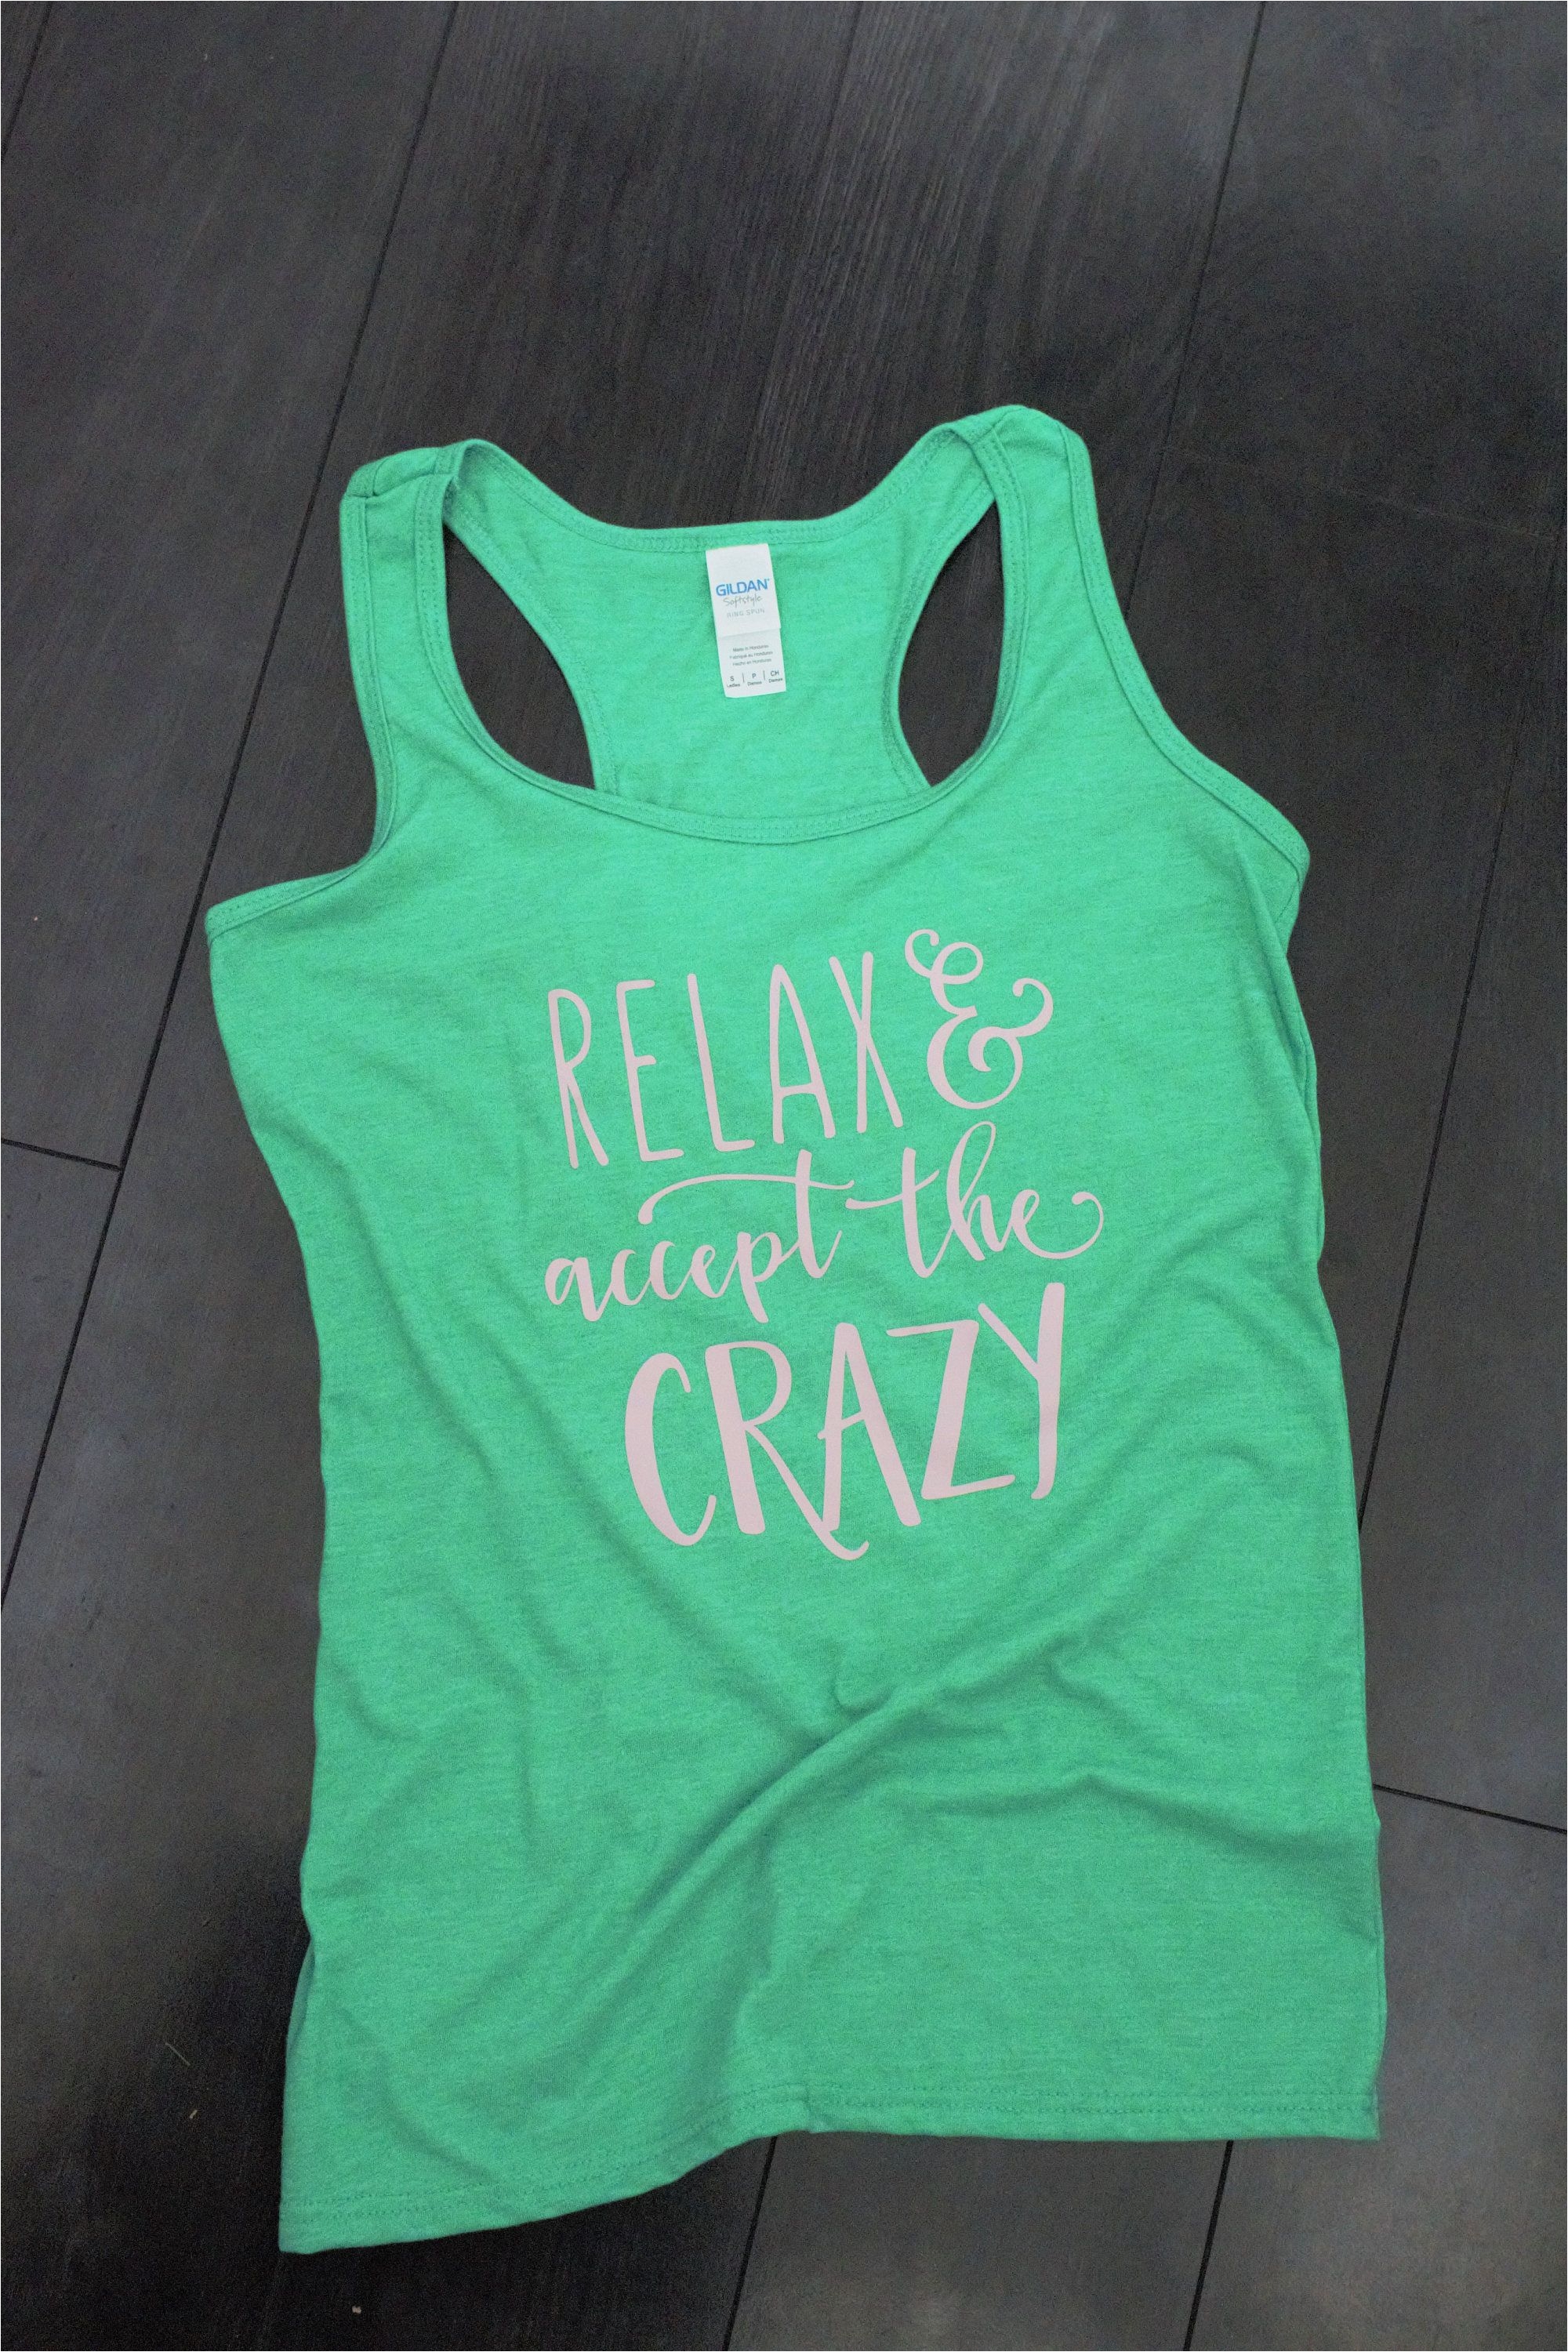 relax and accept the crazycute tank topfunny tank topquote tank